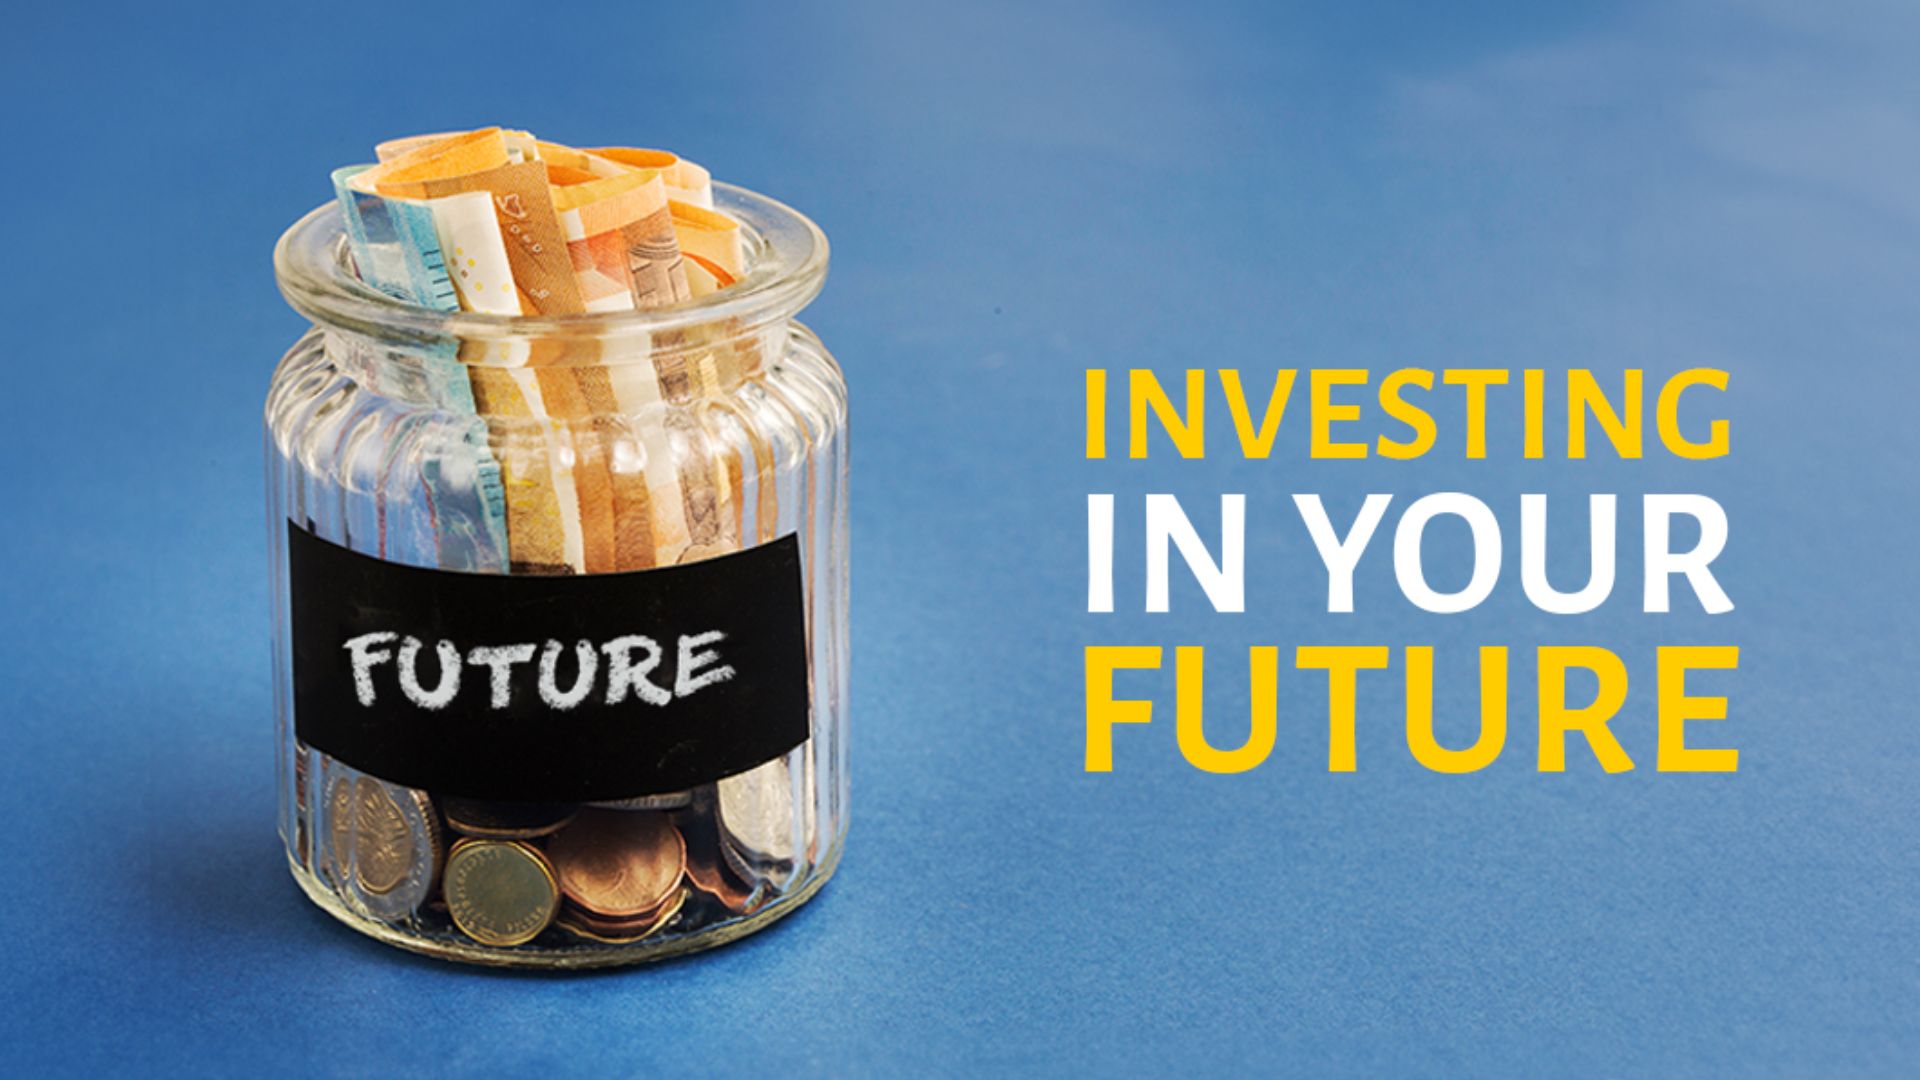 Invest in Your Future